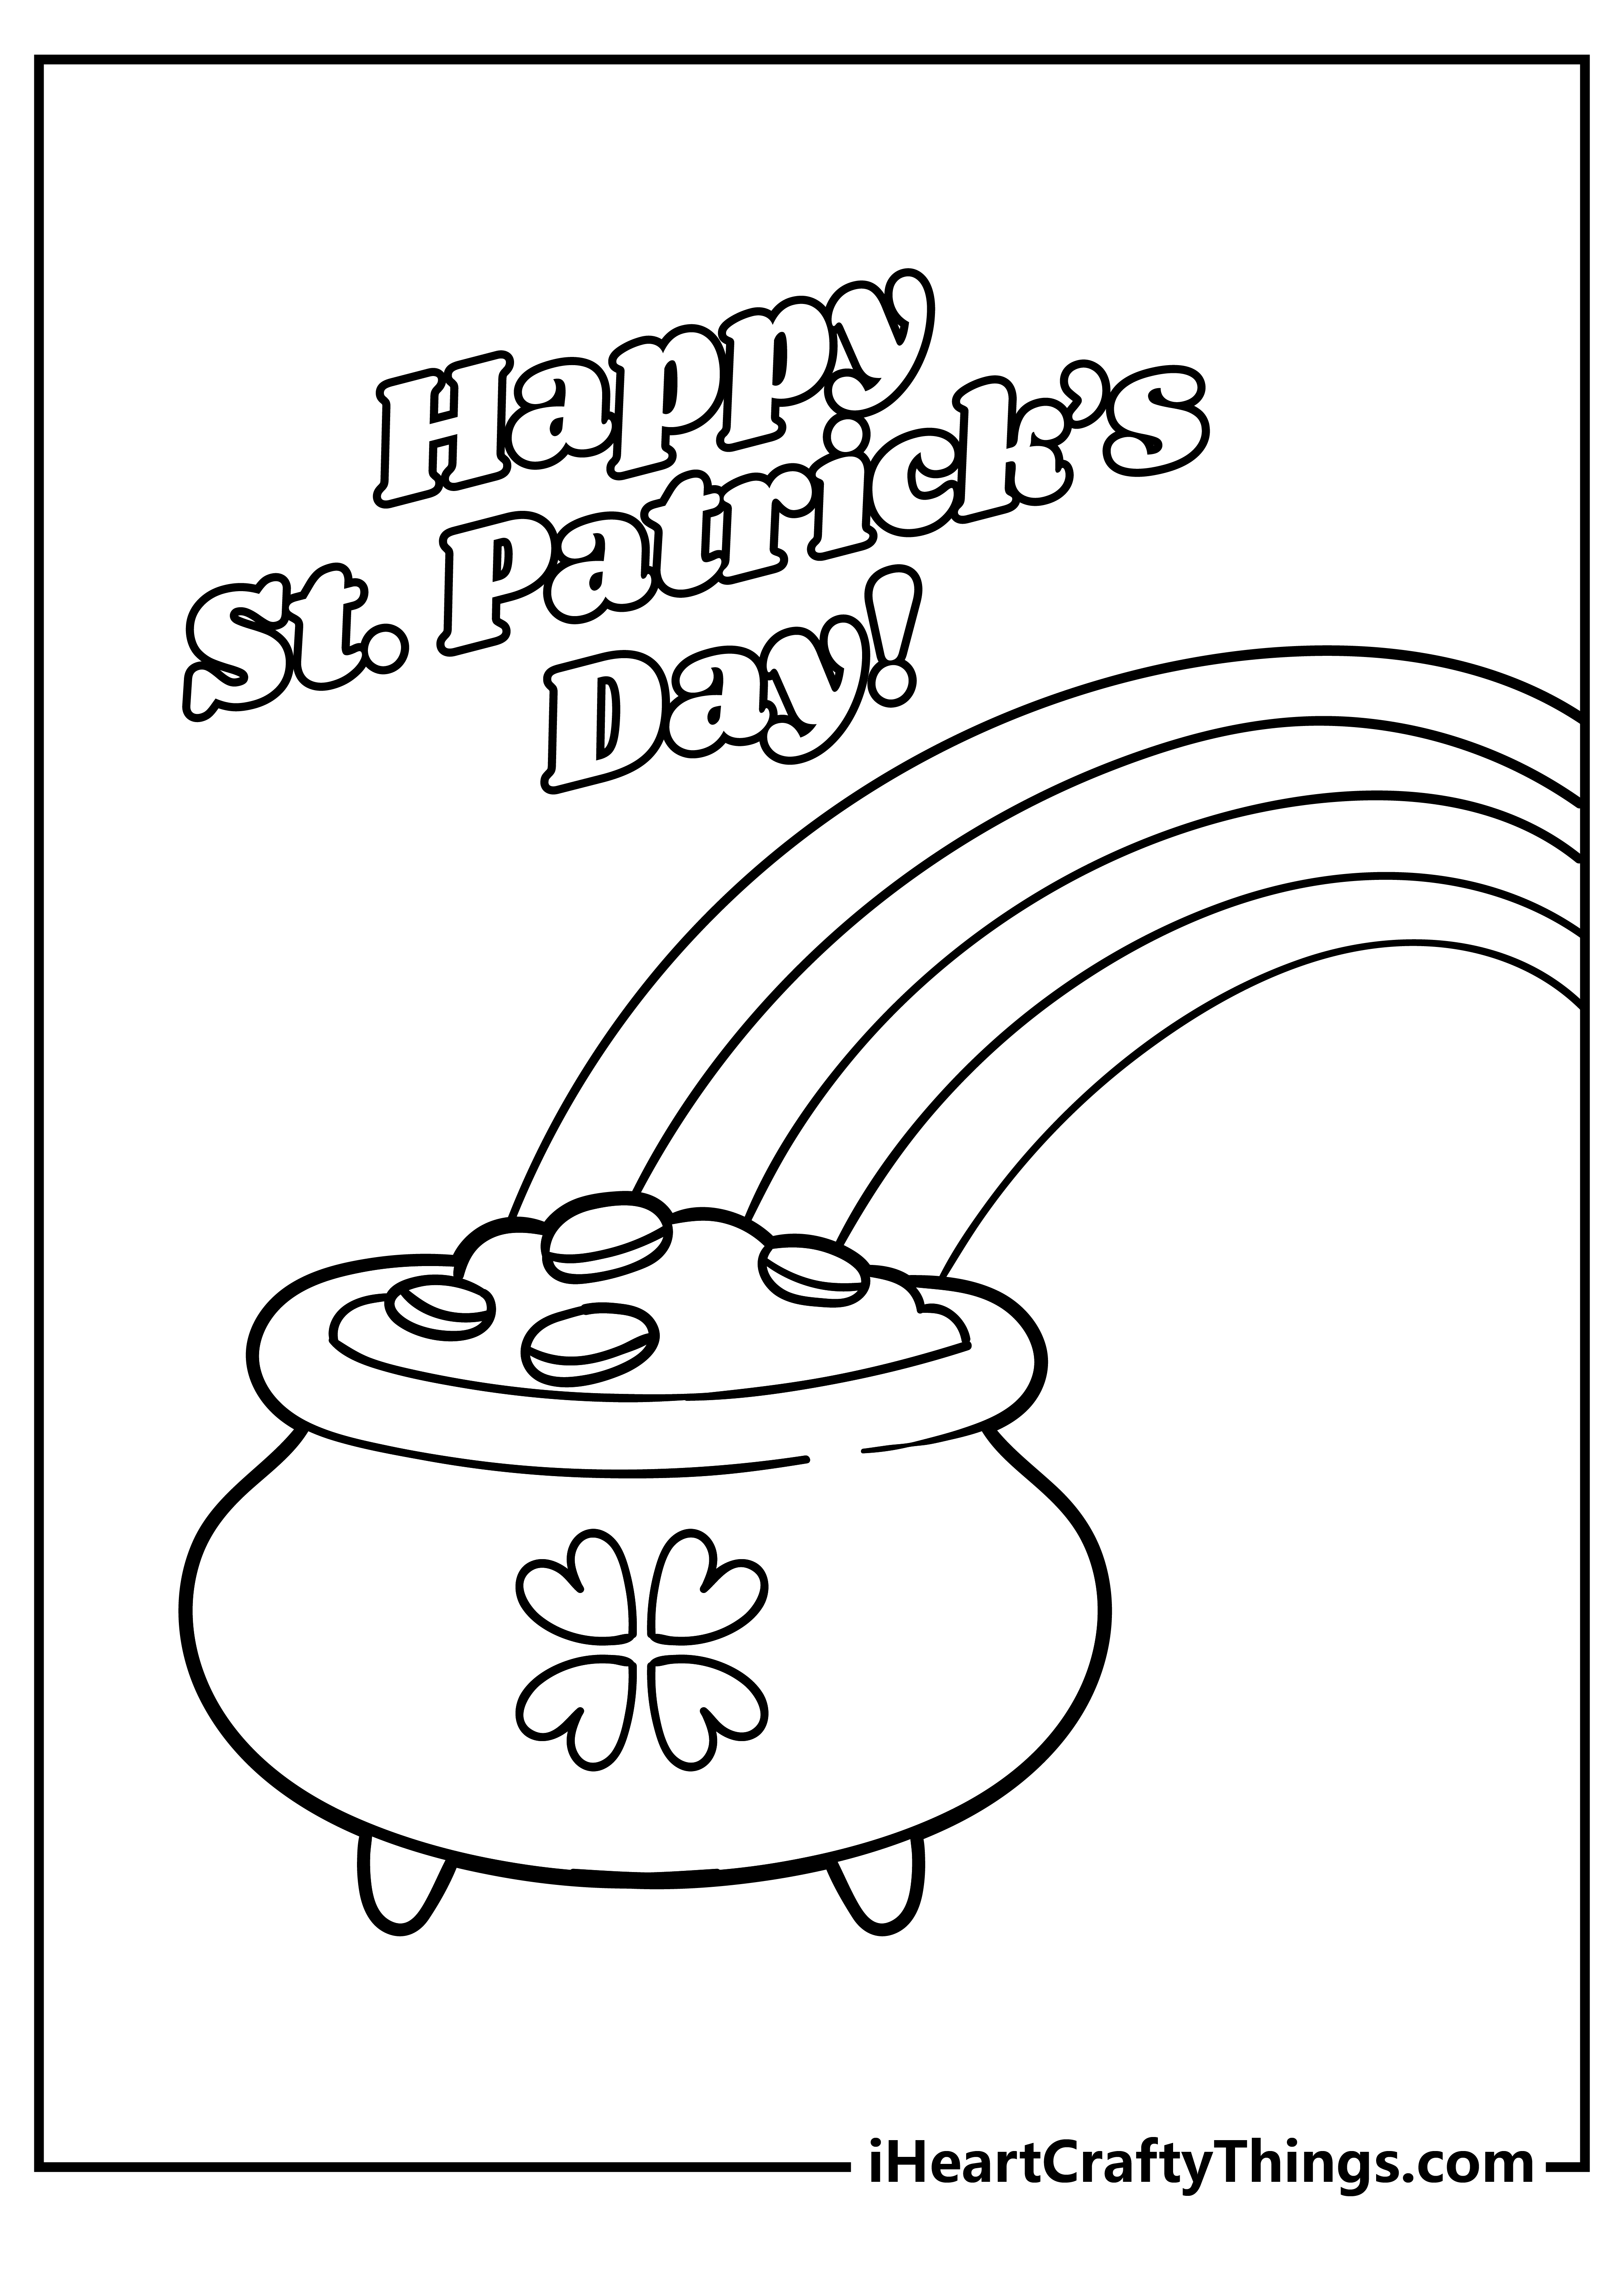 St Patrick’s Day Coloring Original Sheet for children free download